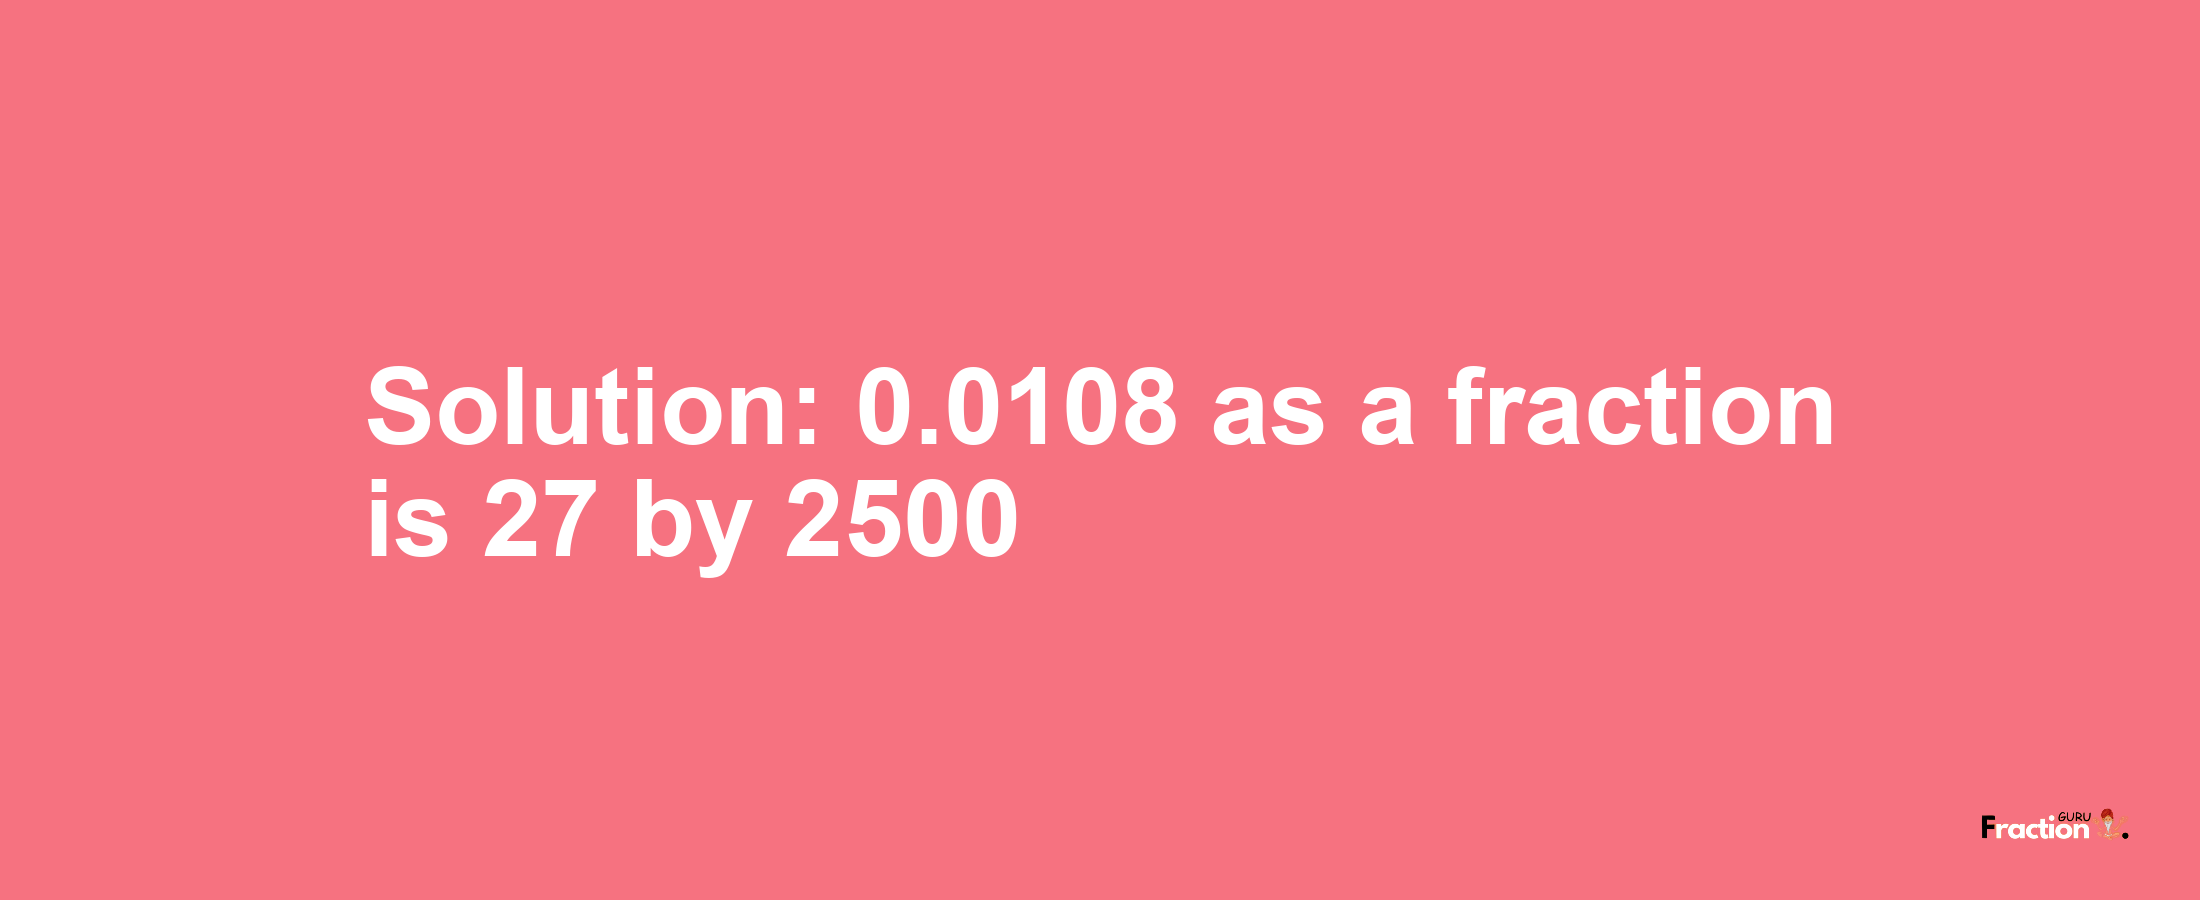 Solution:0.0108 as a fraction is 27/2500